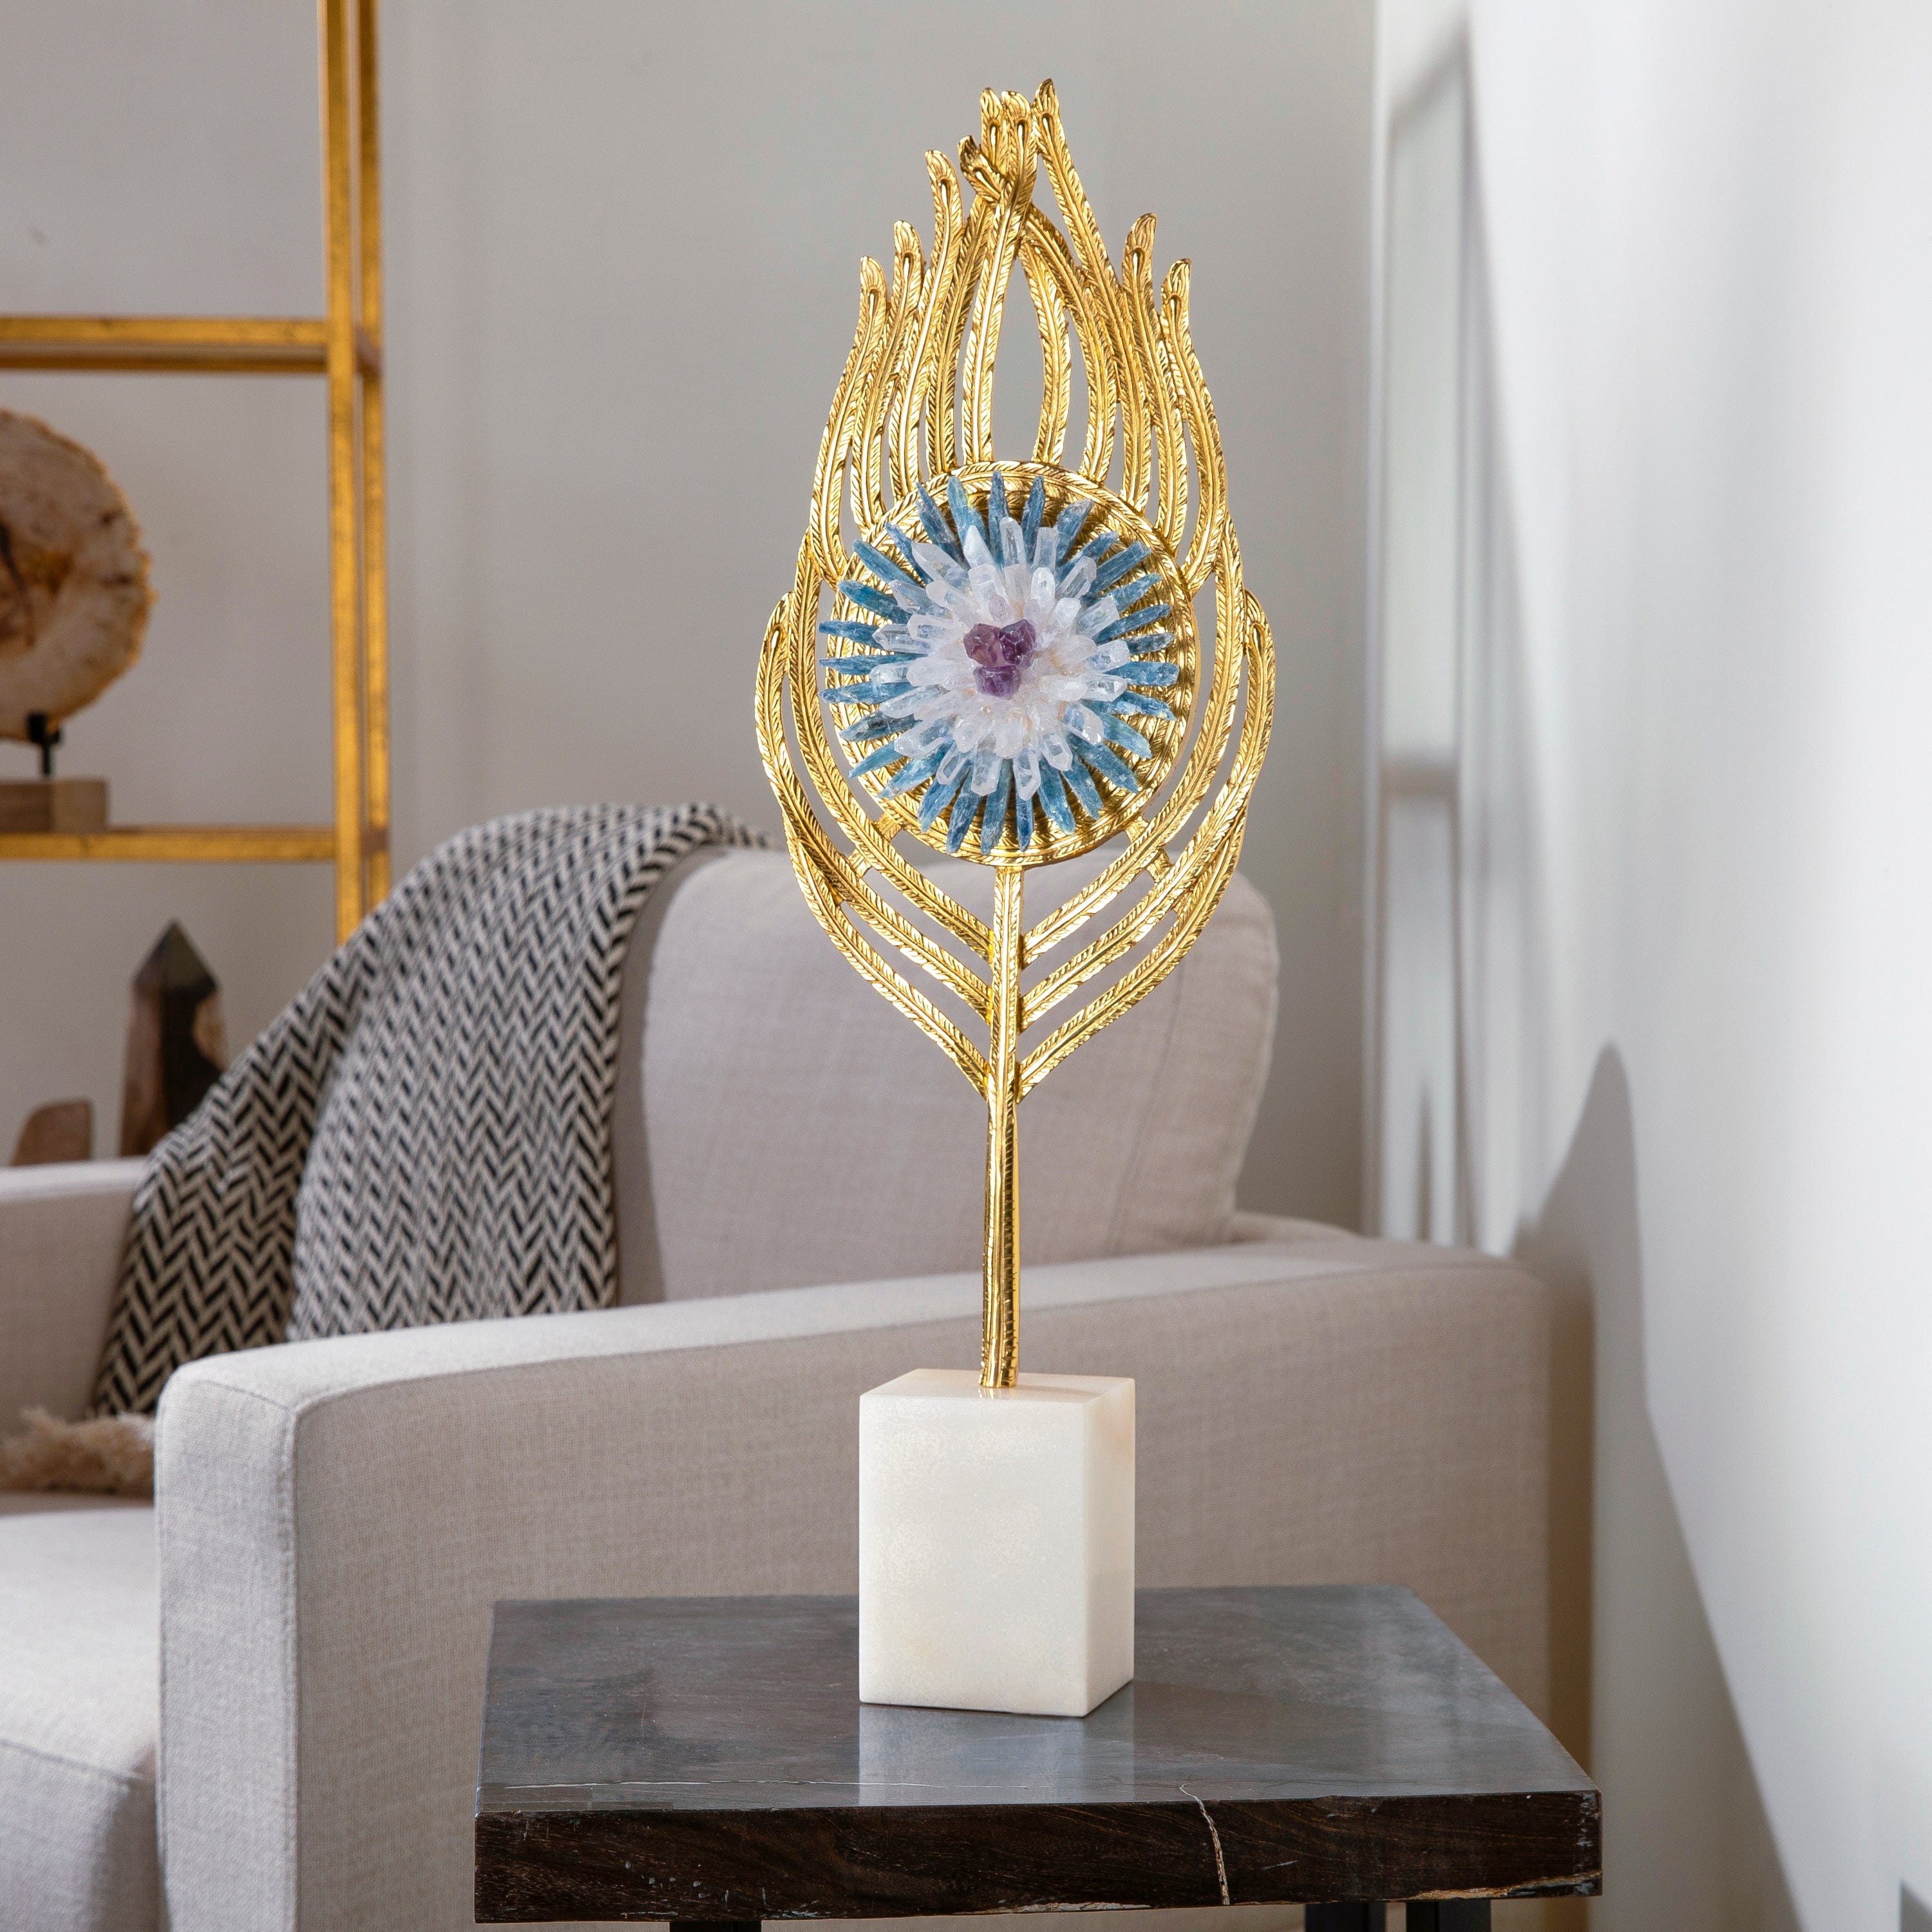 KALIFANO Crystal Home Decor Boho Flower with Kyanite, Quartz, and Amethyst on Brass and Marble Stand HG1334B-MT